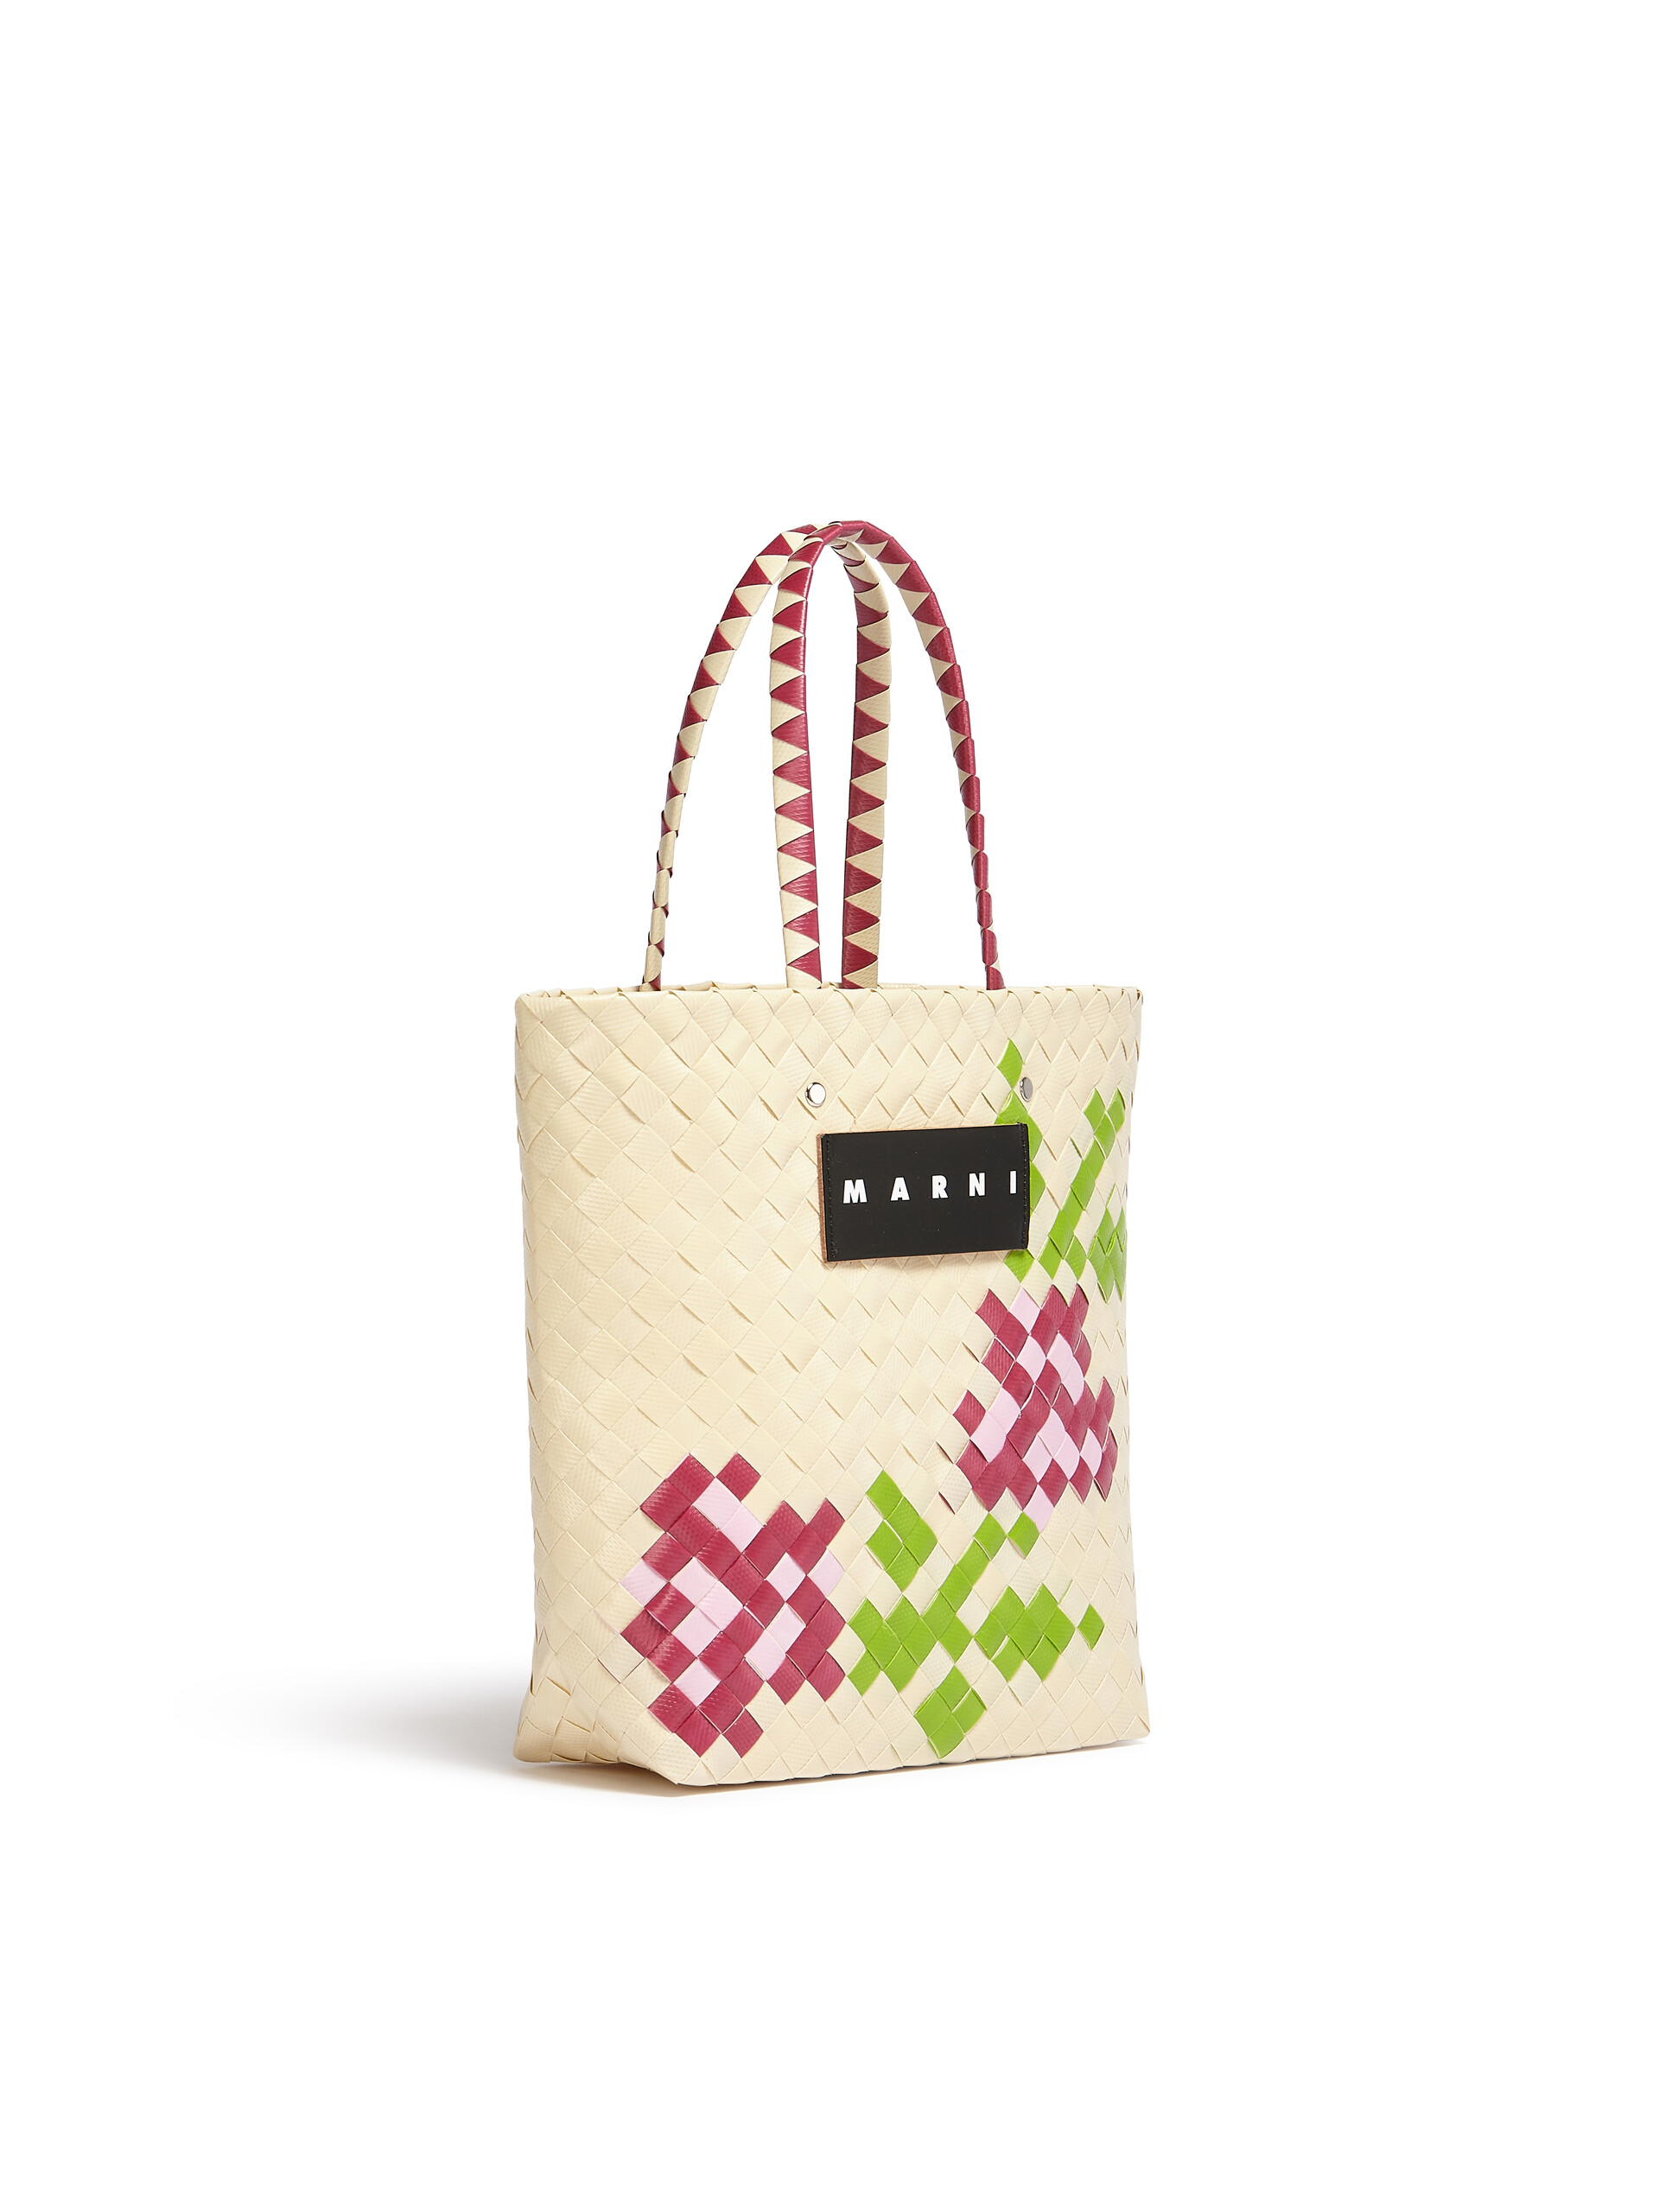 MARNI MARKET small bag in white flower motif - Bags - Image 2